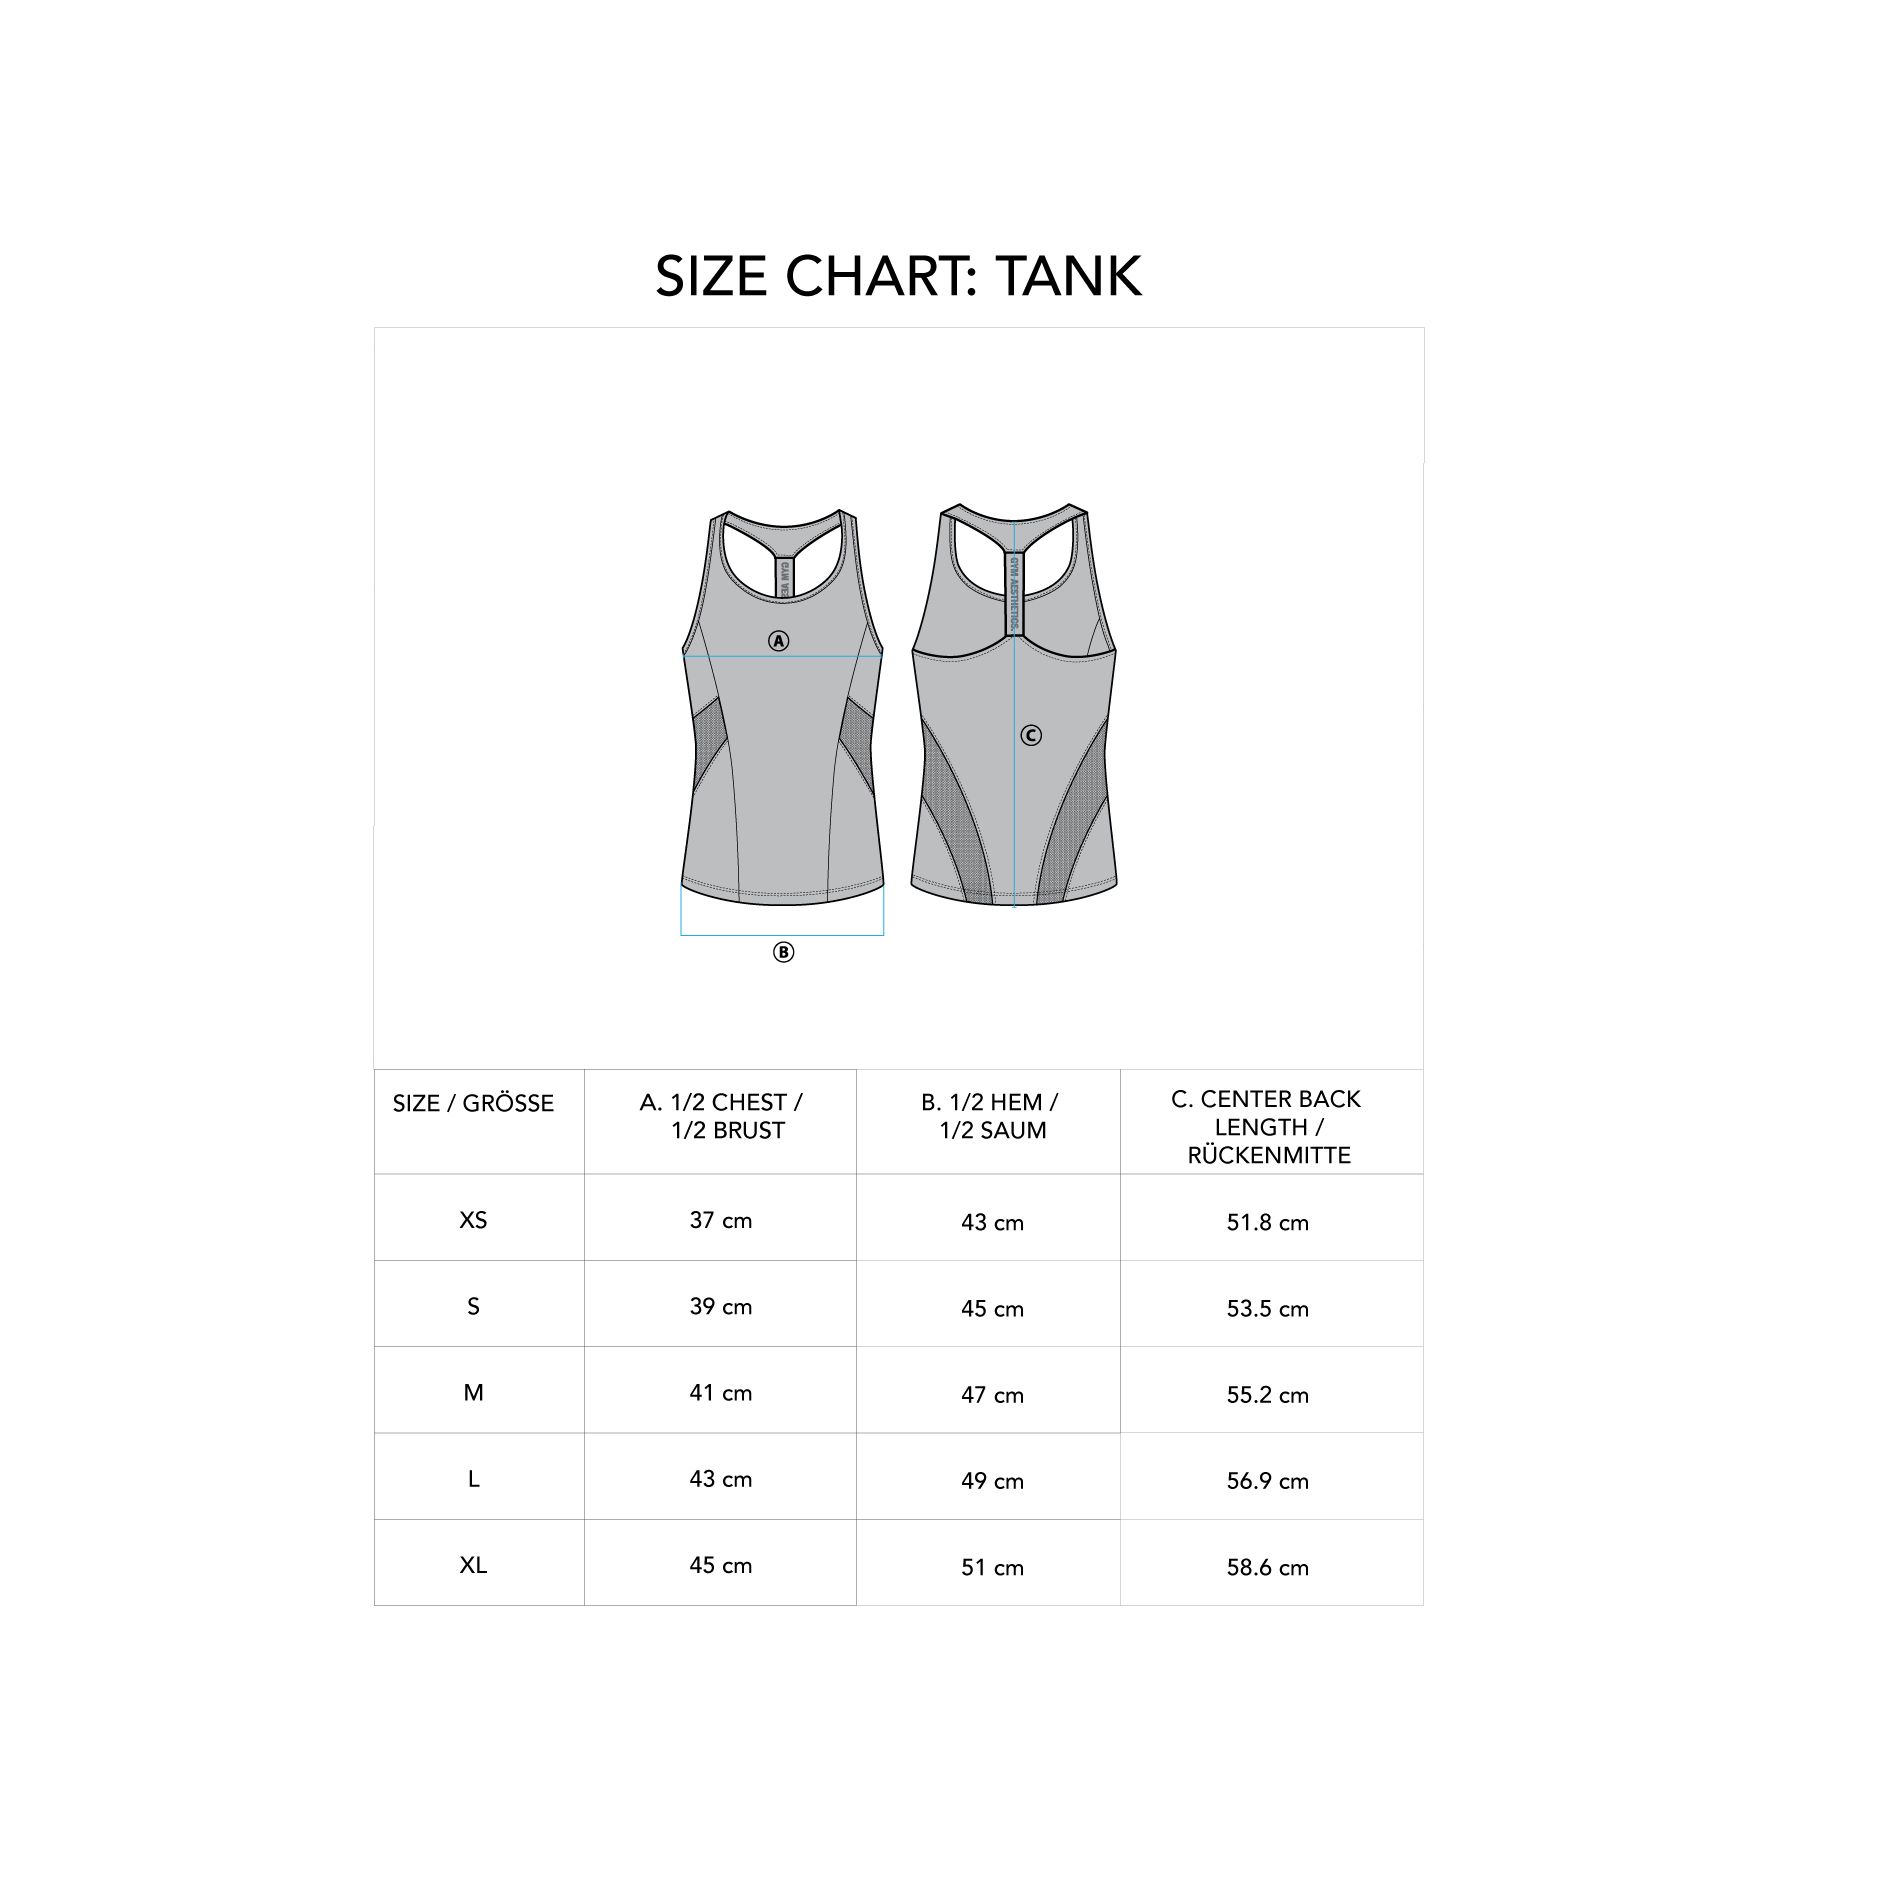 Activewear Body Builder Gym Tank for Women - size chart